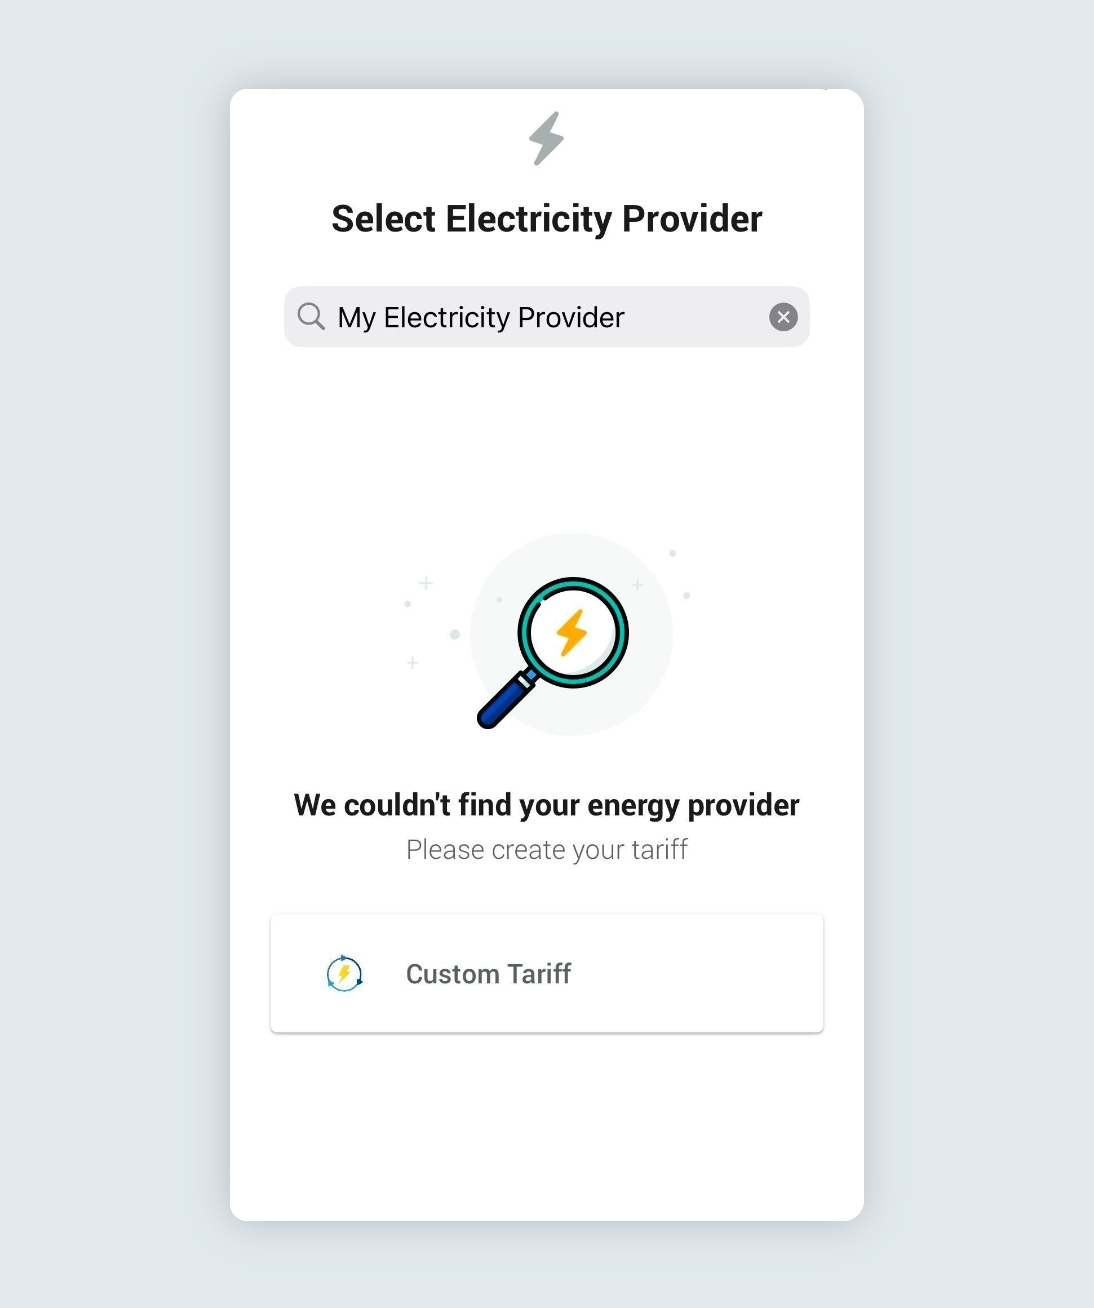 Screen informing energy provider not found in the Ohme app with option to create custom tariff